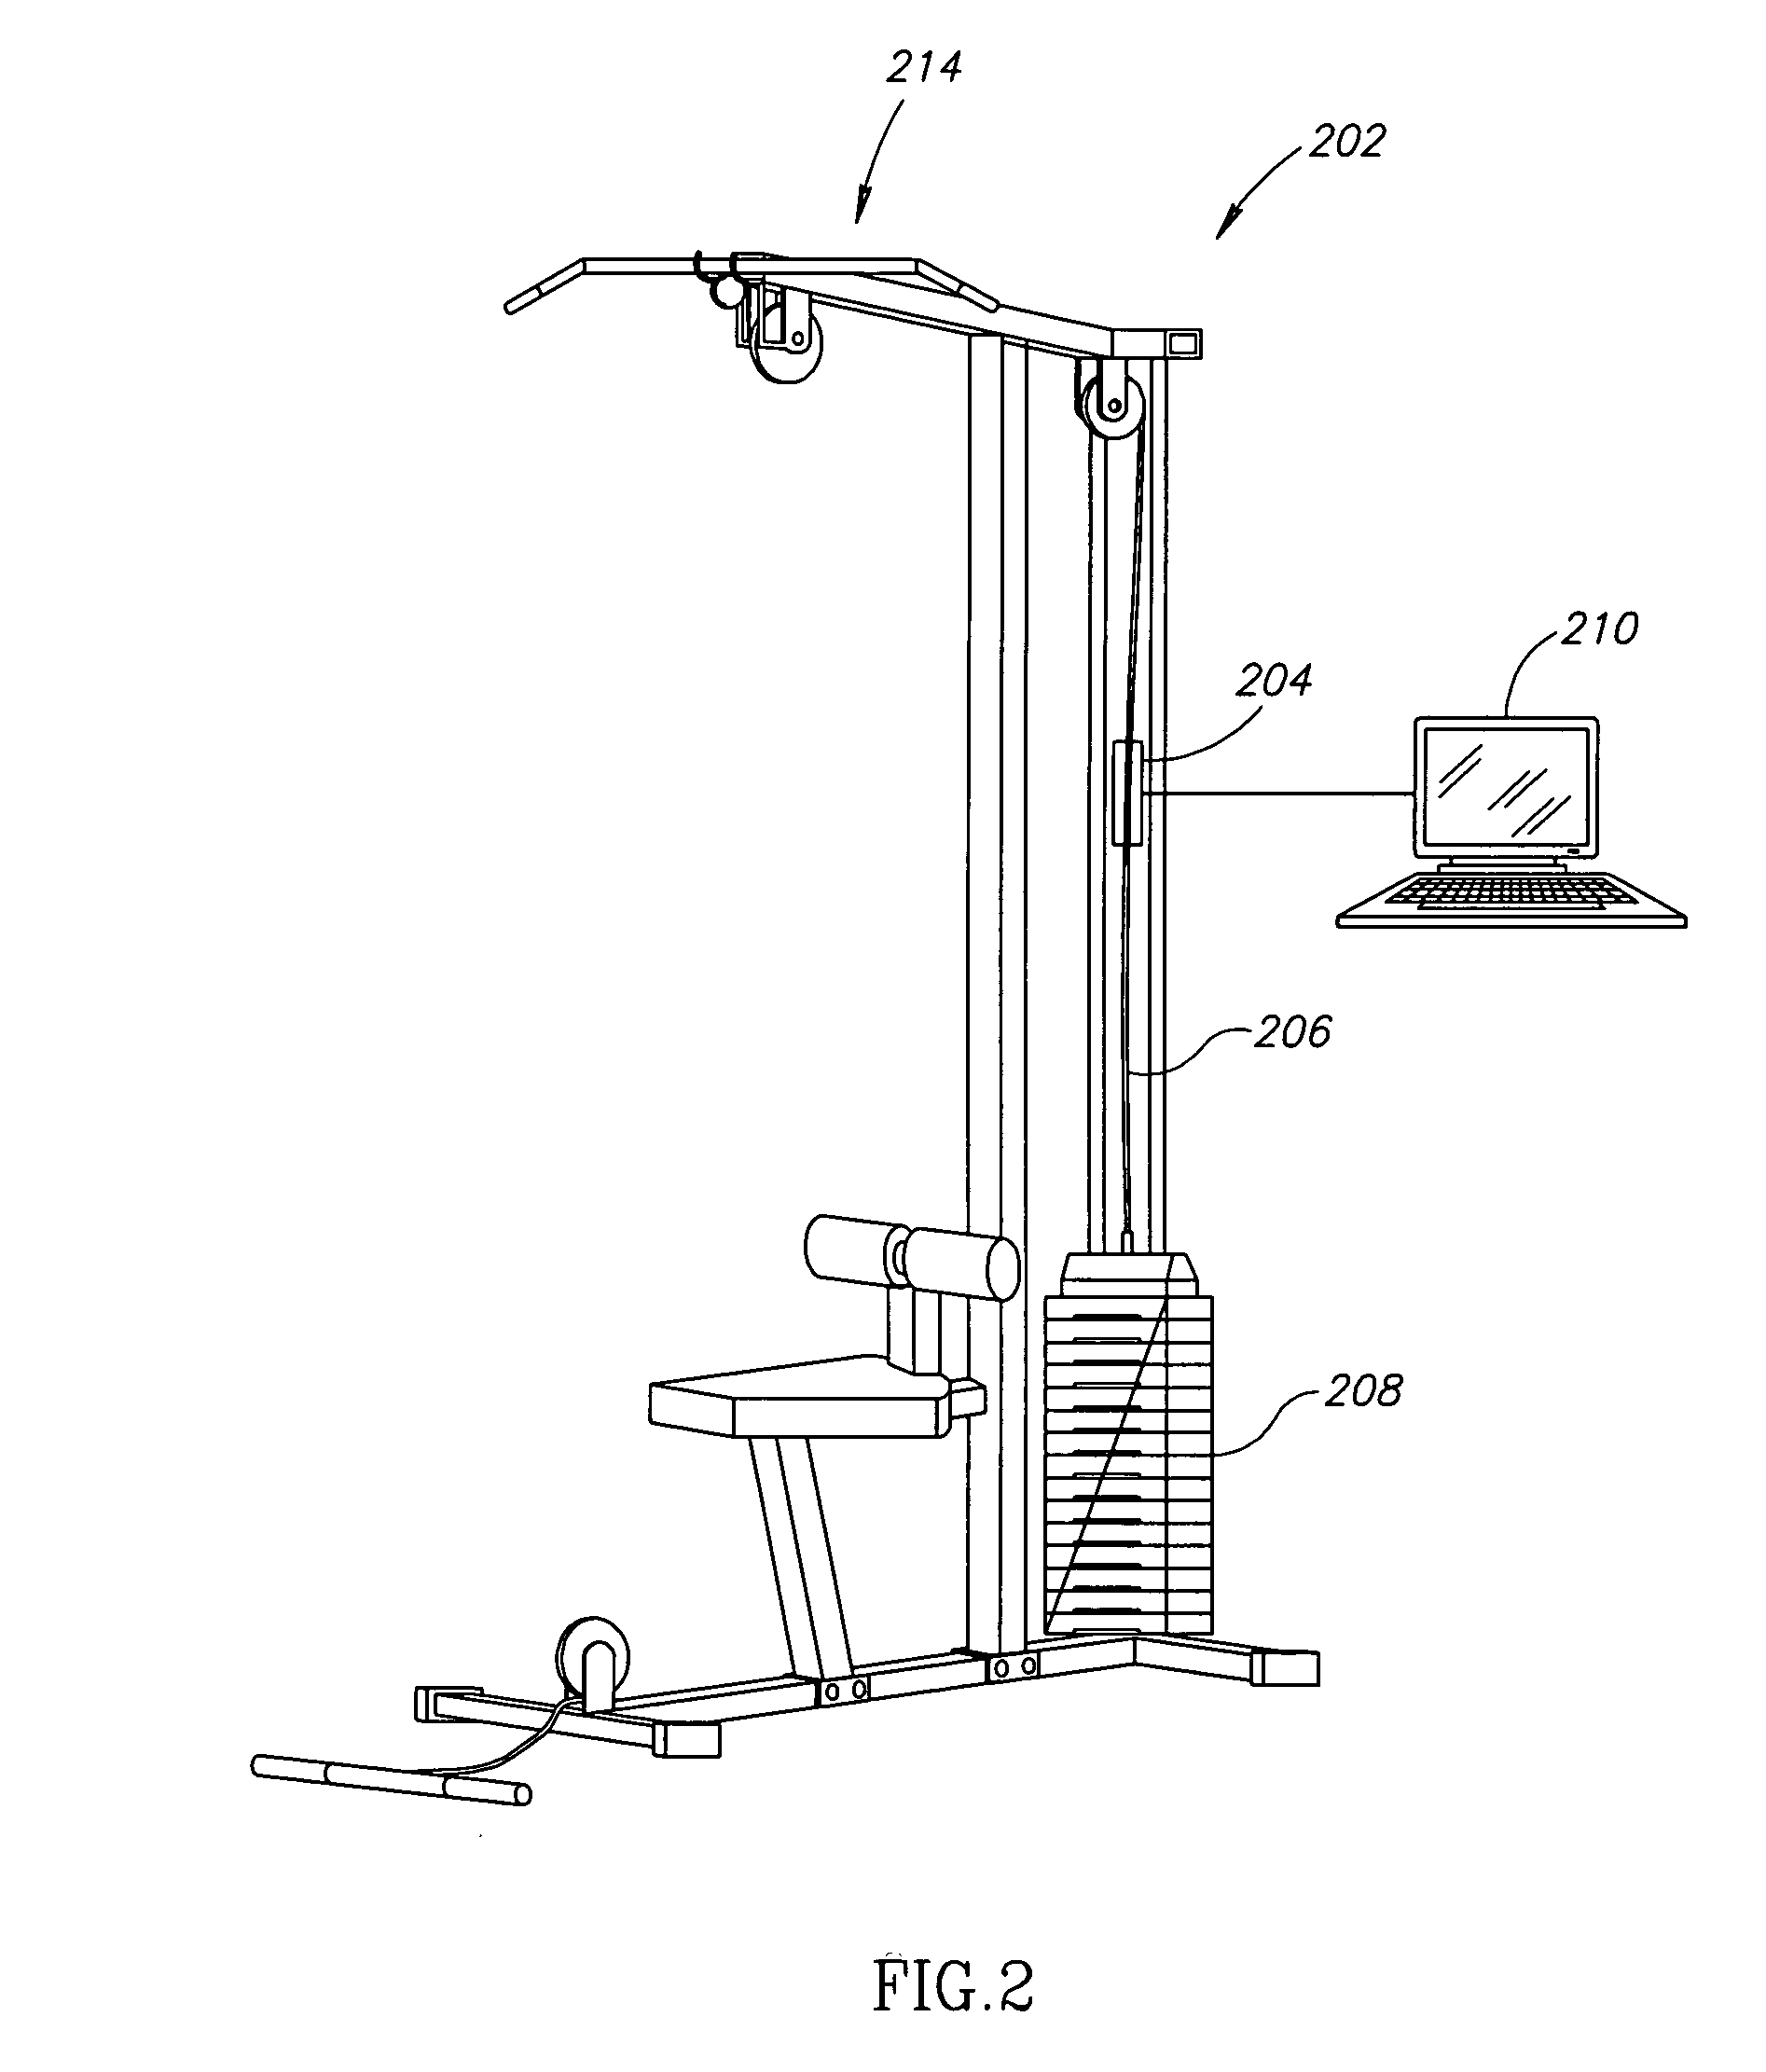 Apparatuses for retrofitting exercise equipment and methods for using same